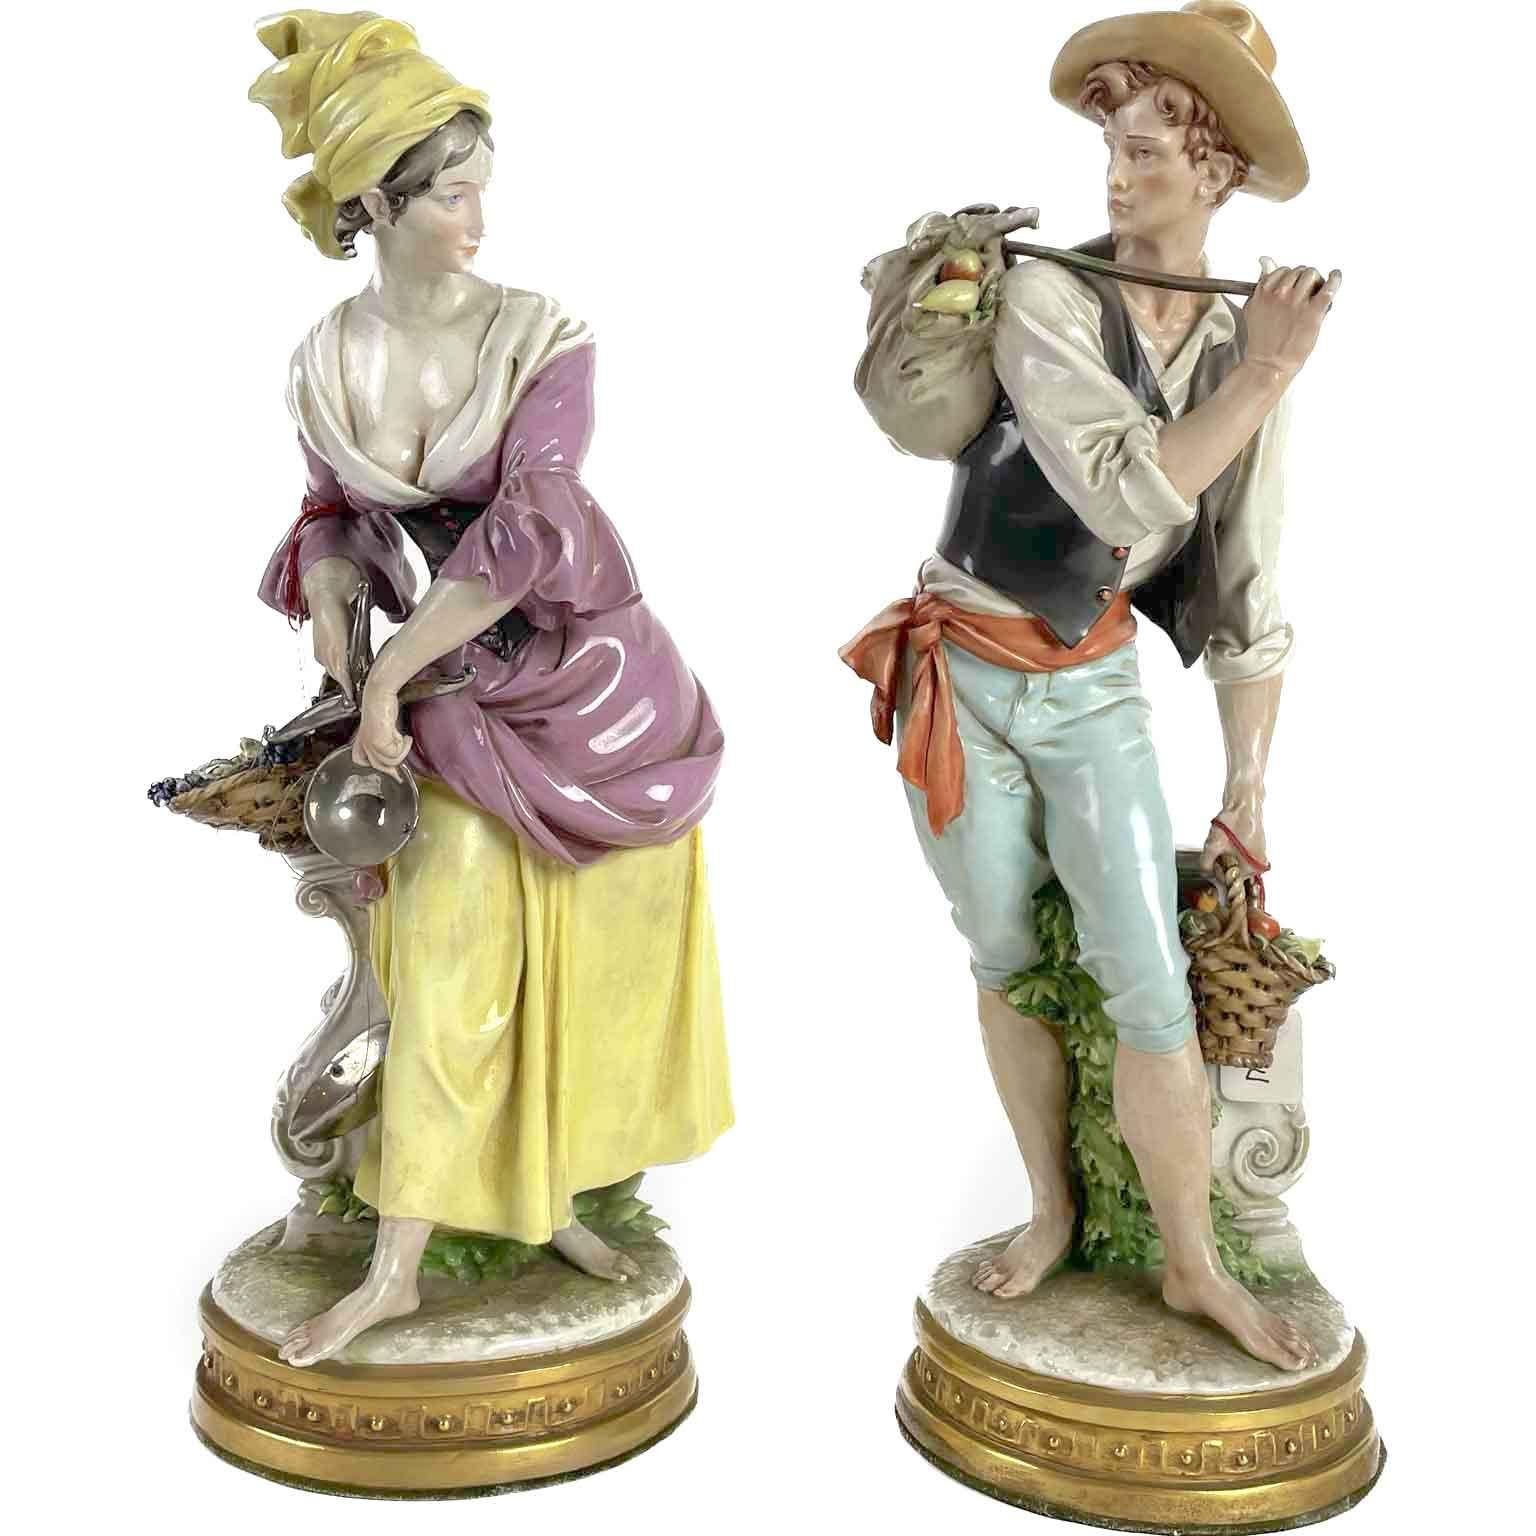 Pair of Italian Peasant Figures Allegory of Abundance by Cappe Giuseppe, 1960s For Sale 2